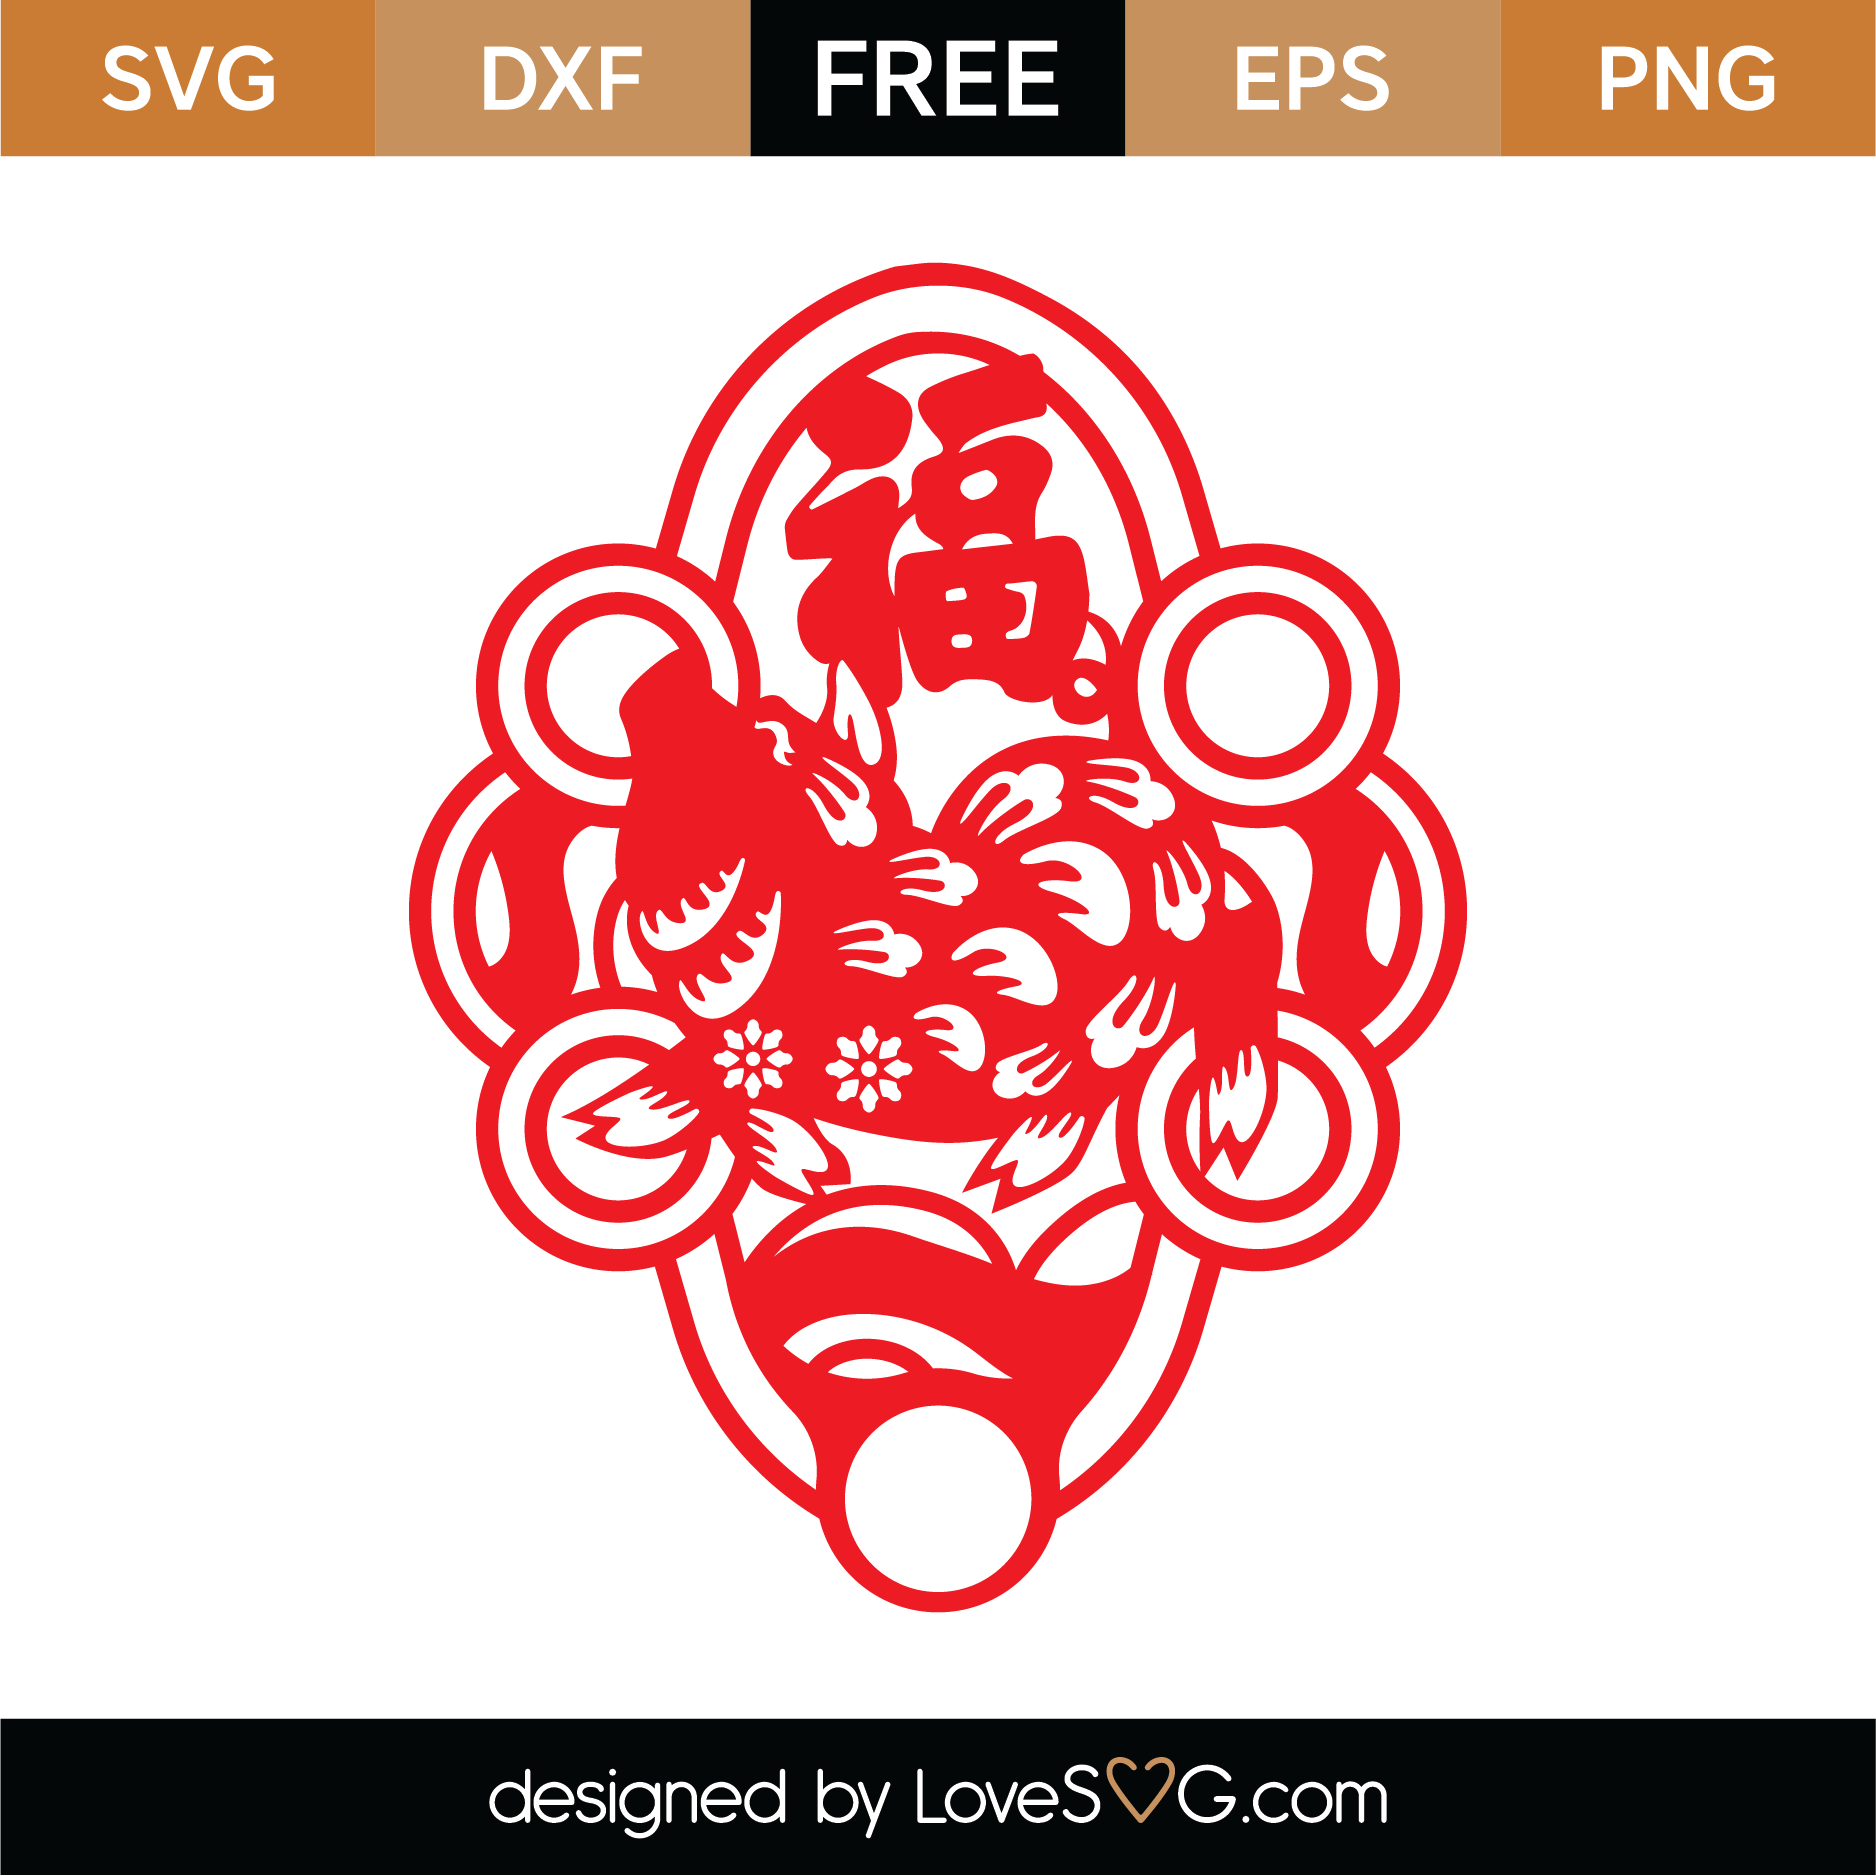 Download Free Chinese New Year SVG Cut File | Lovesvg.com